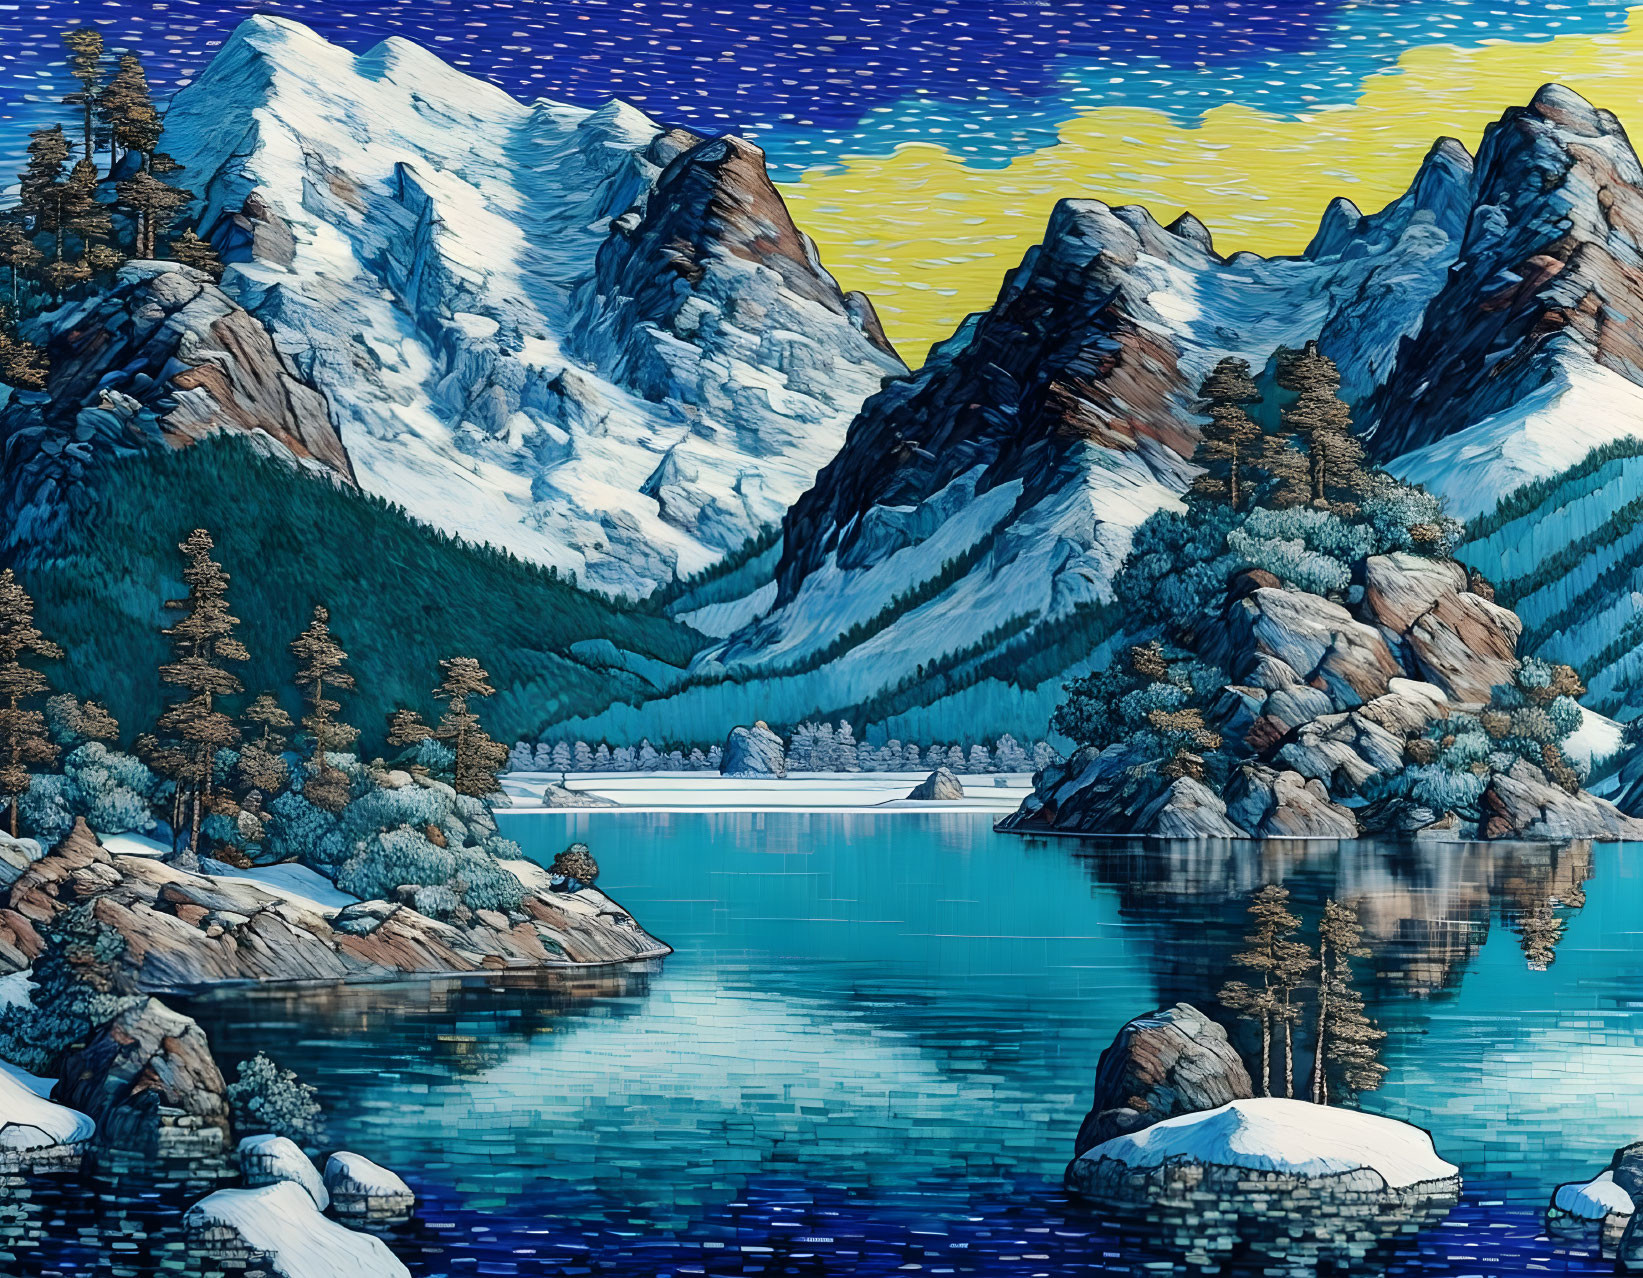 Winter mountain scene with snow-covered peaks, pine trees, reflective lake, striped sky